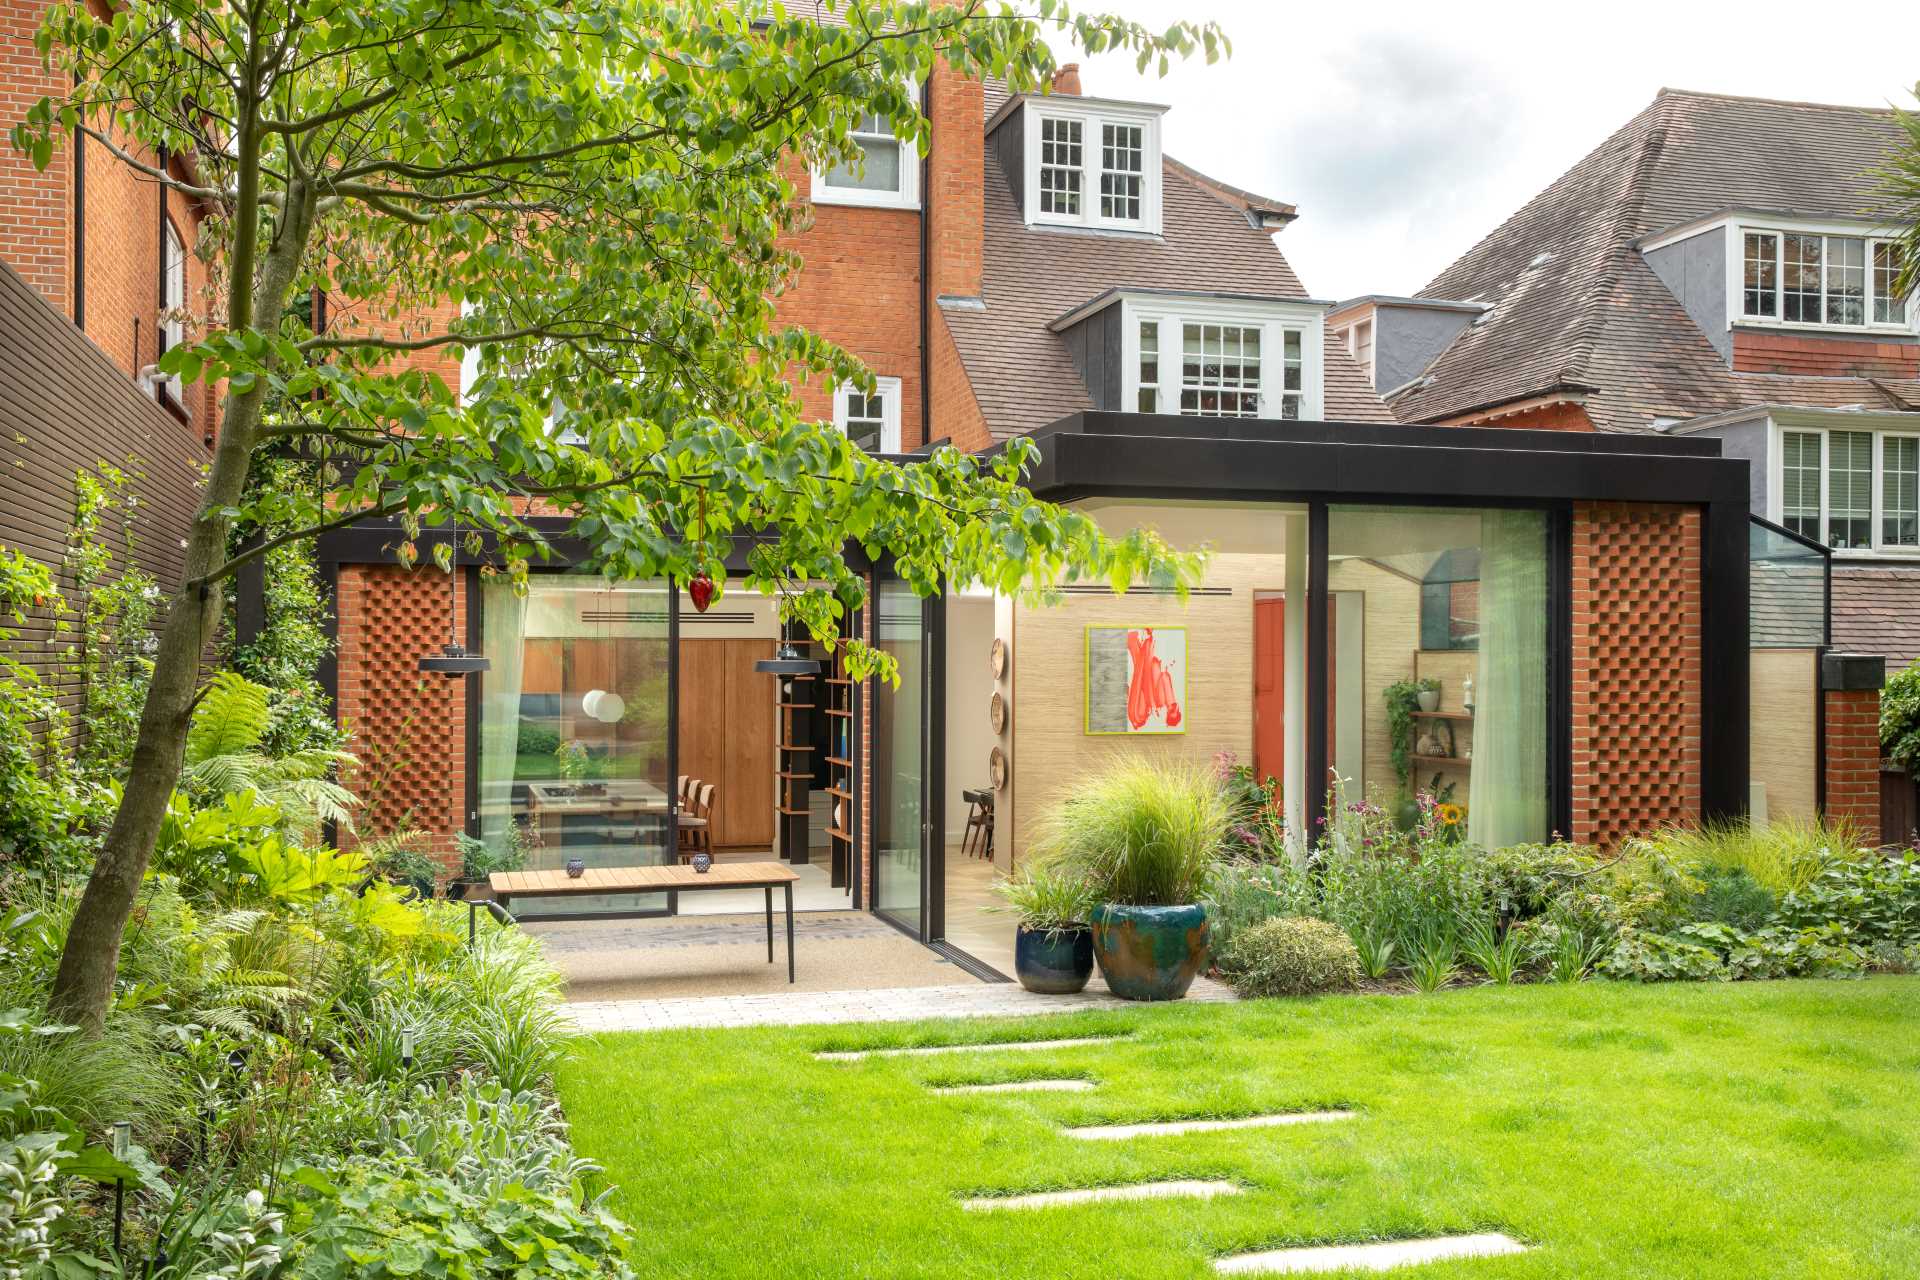 The black steel frame contrasted against the color of the red clay brick facade, while the glass sliding doors create a frame around the new living space as it leads seamlessly into the garden.